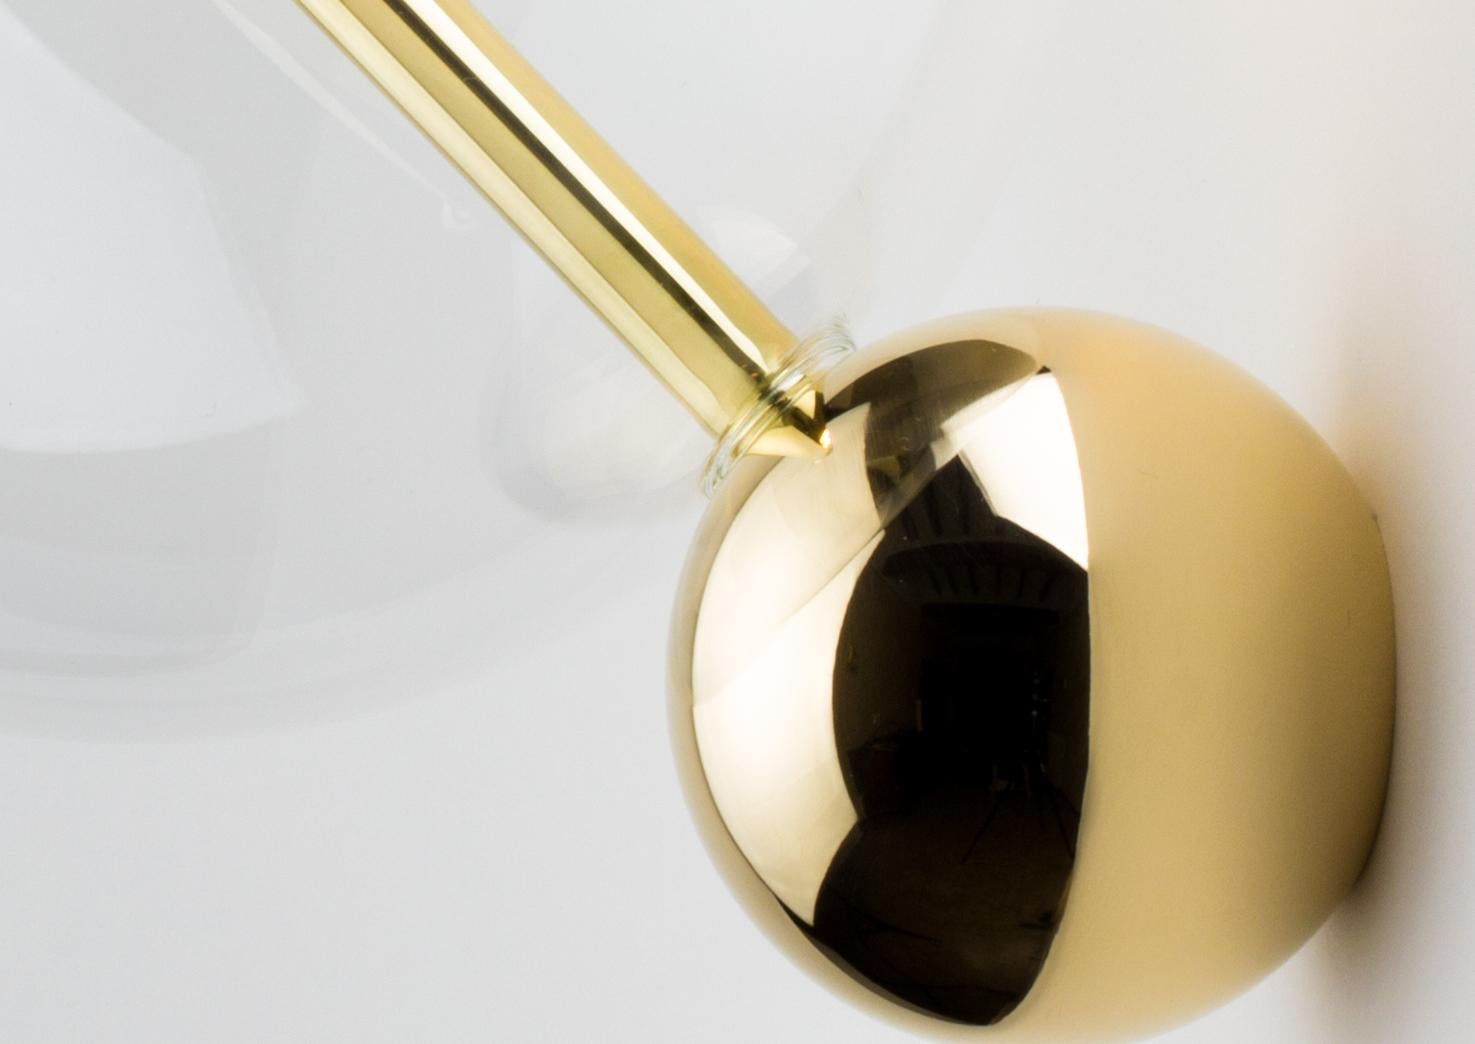 Italian Lune One Light Contemporary Sconce / Wall Light Polished Brass Handblown Glass For Sale